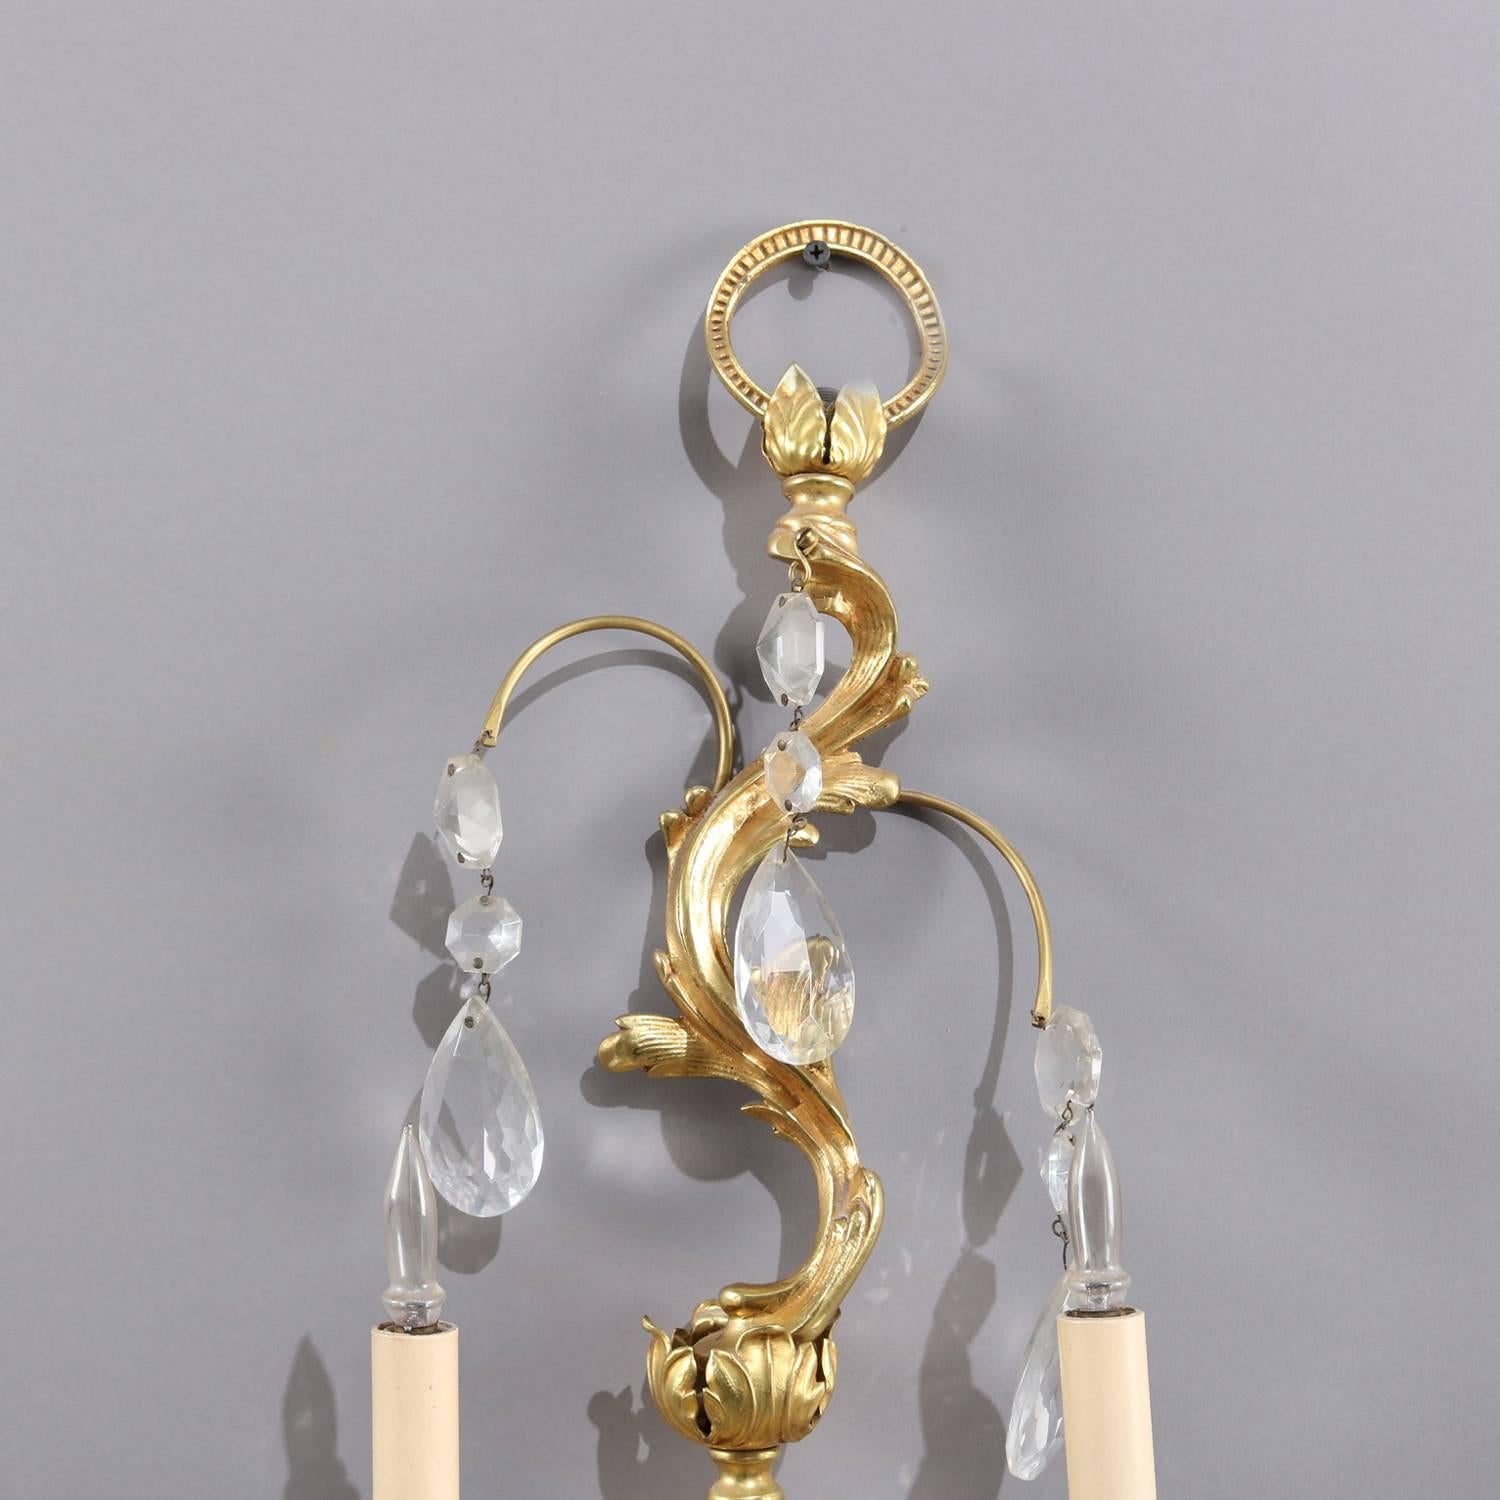 Cast Oversized French Rococo Foliate Form Gilt Bronze Cut Crystal Wall Sconces